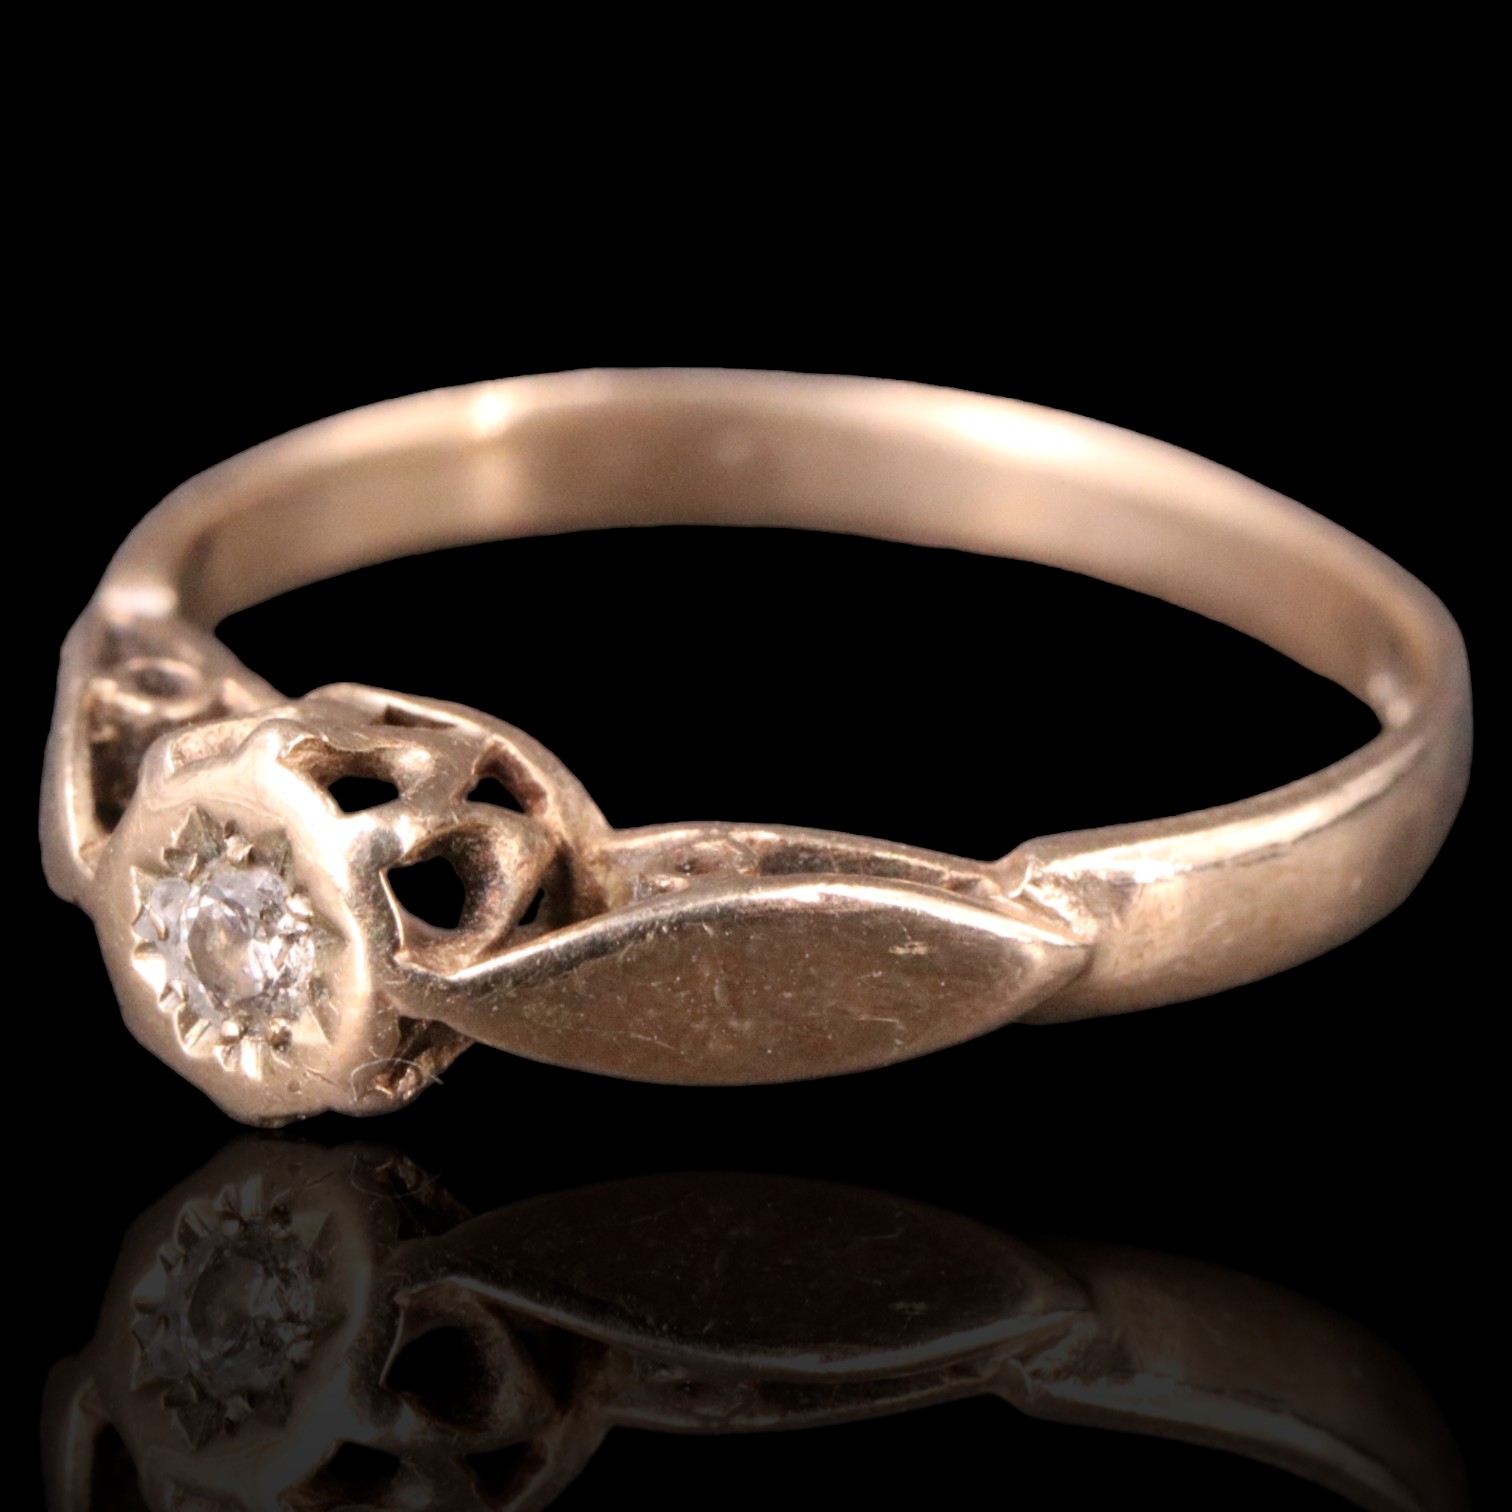 A solitaire diamond ring, having an illusion set 2.5 mm diamond brilliant set on an open gallery